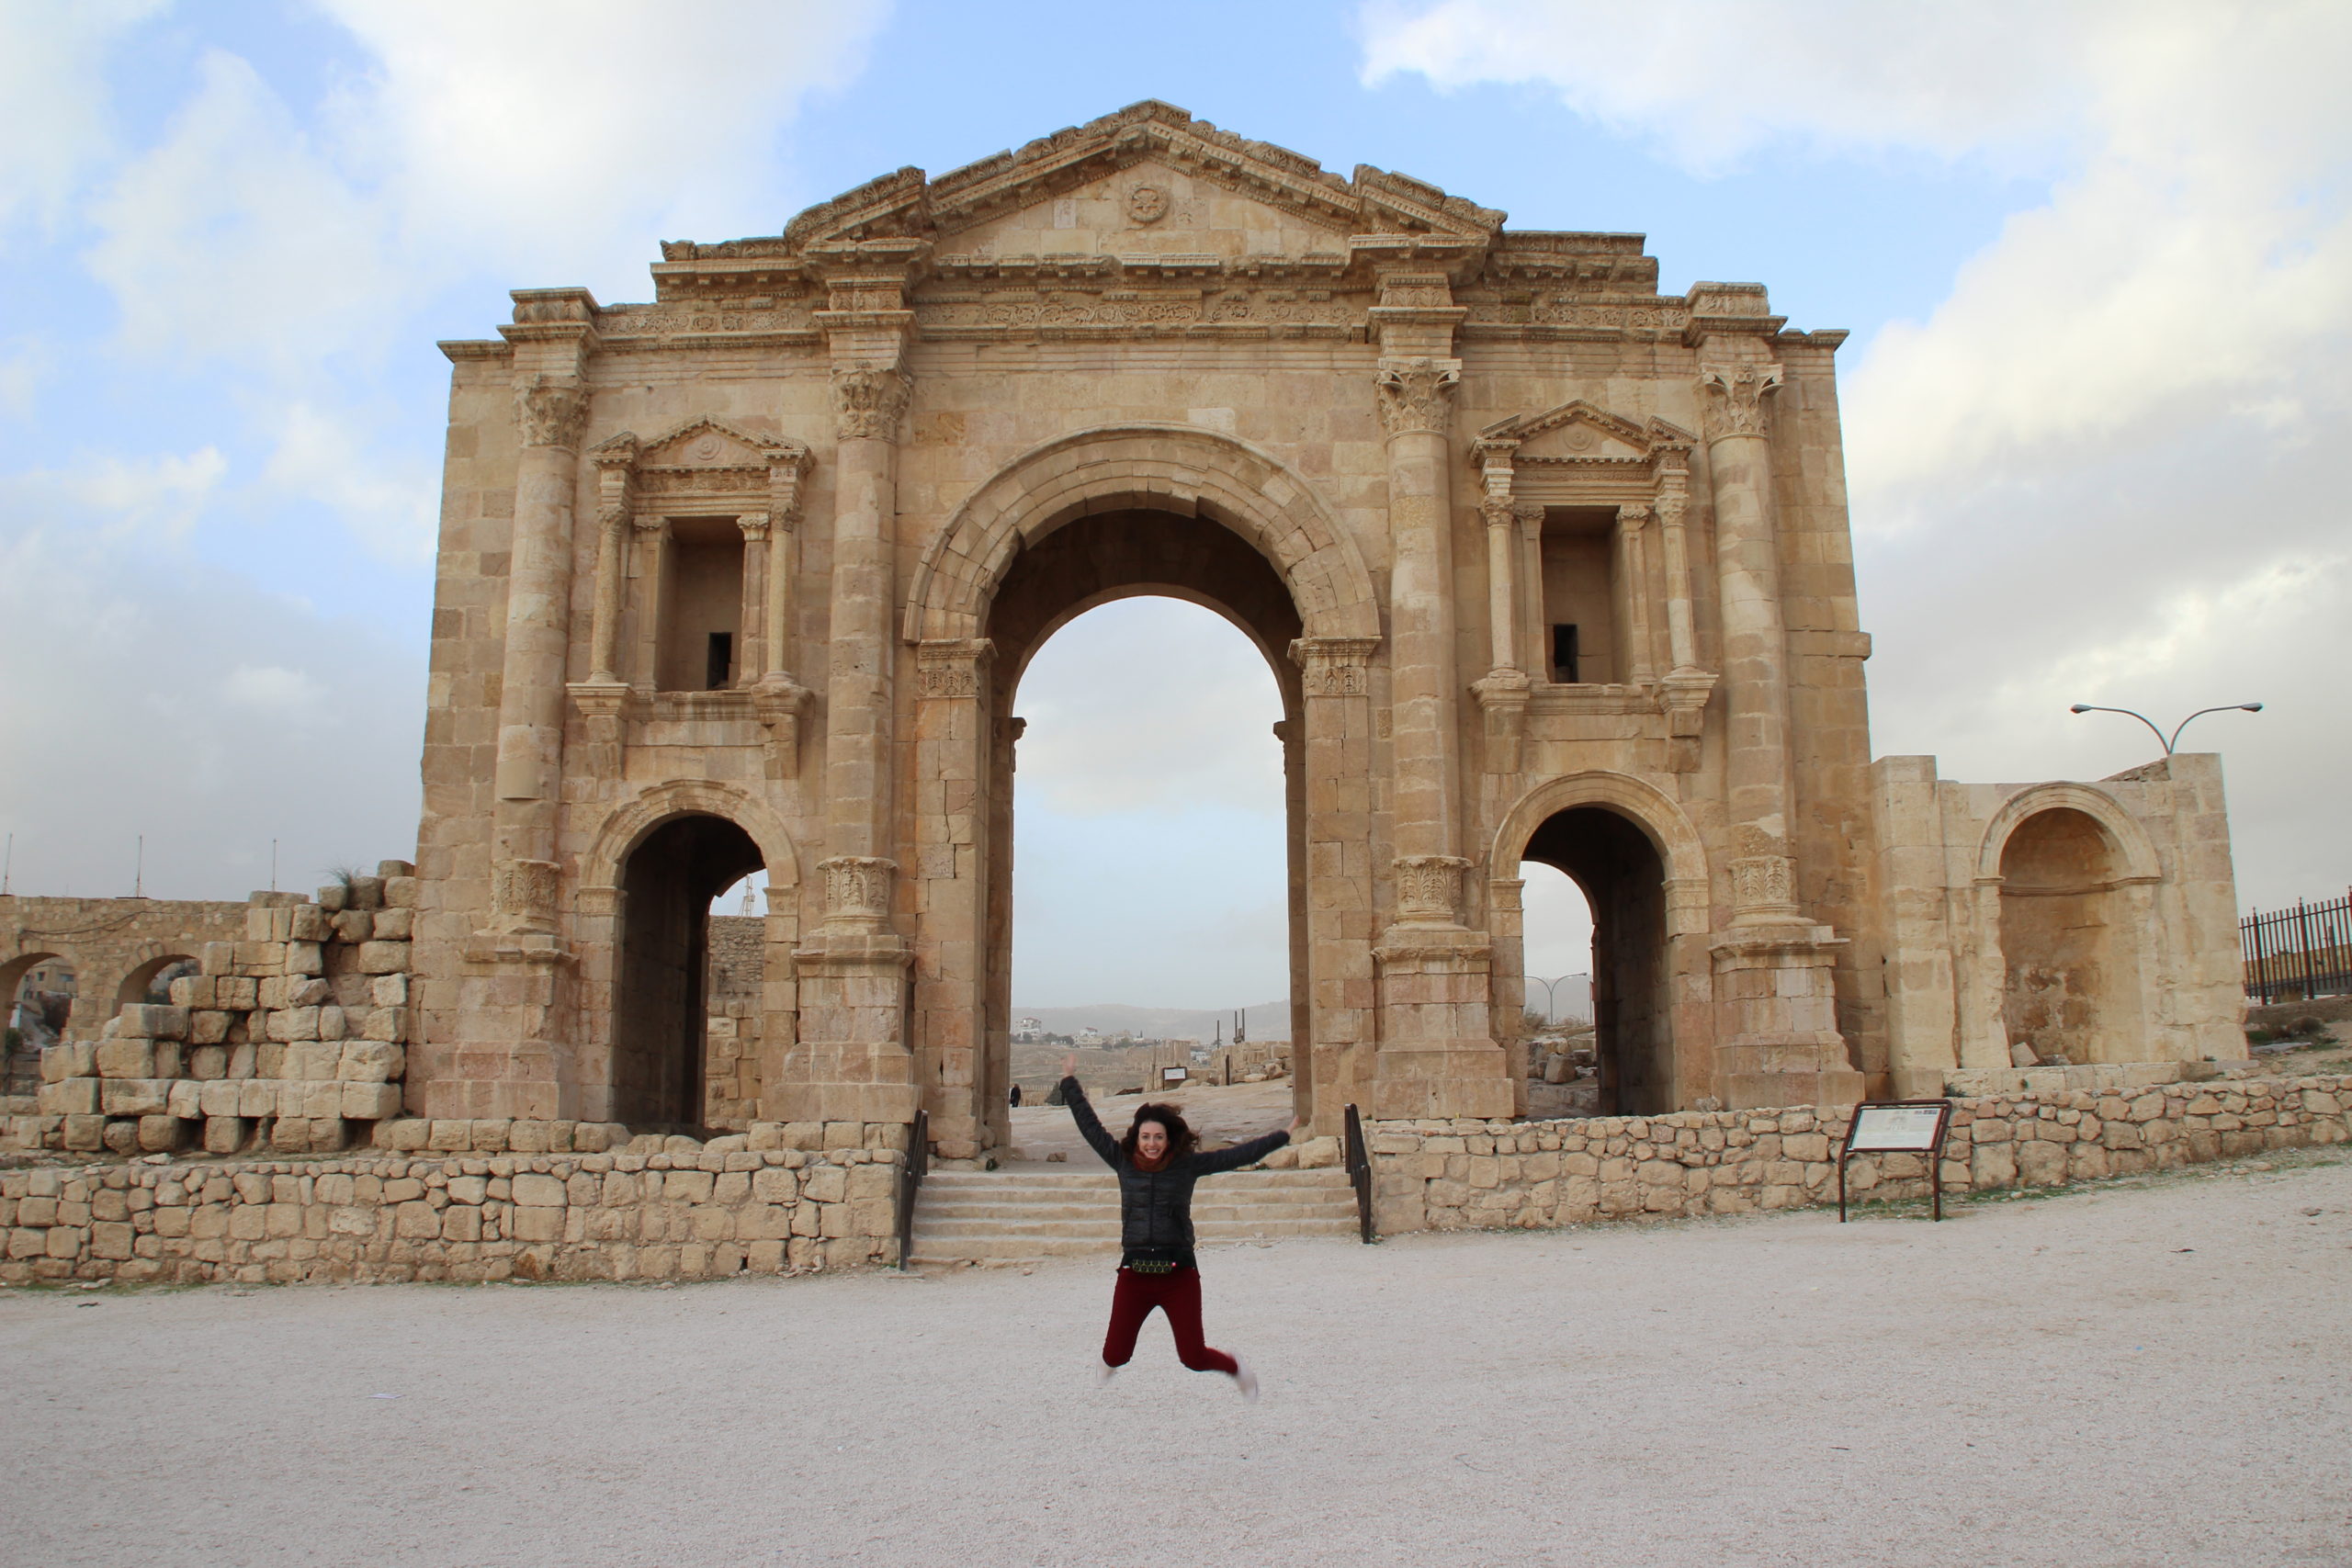 Jumping in front of the Arch of Adrian